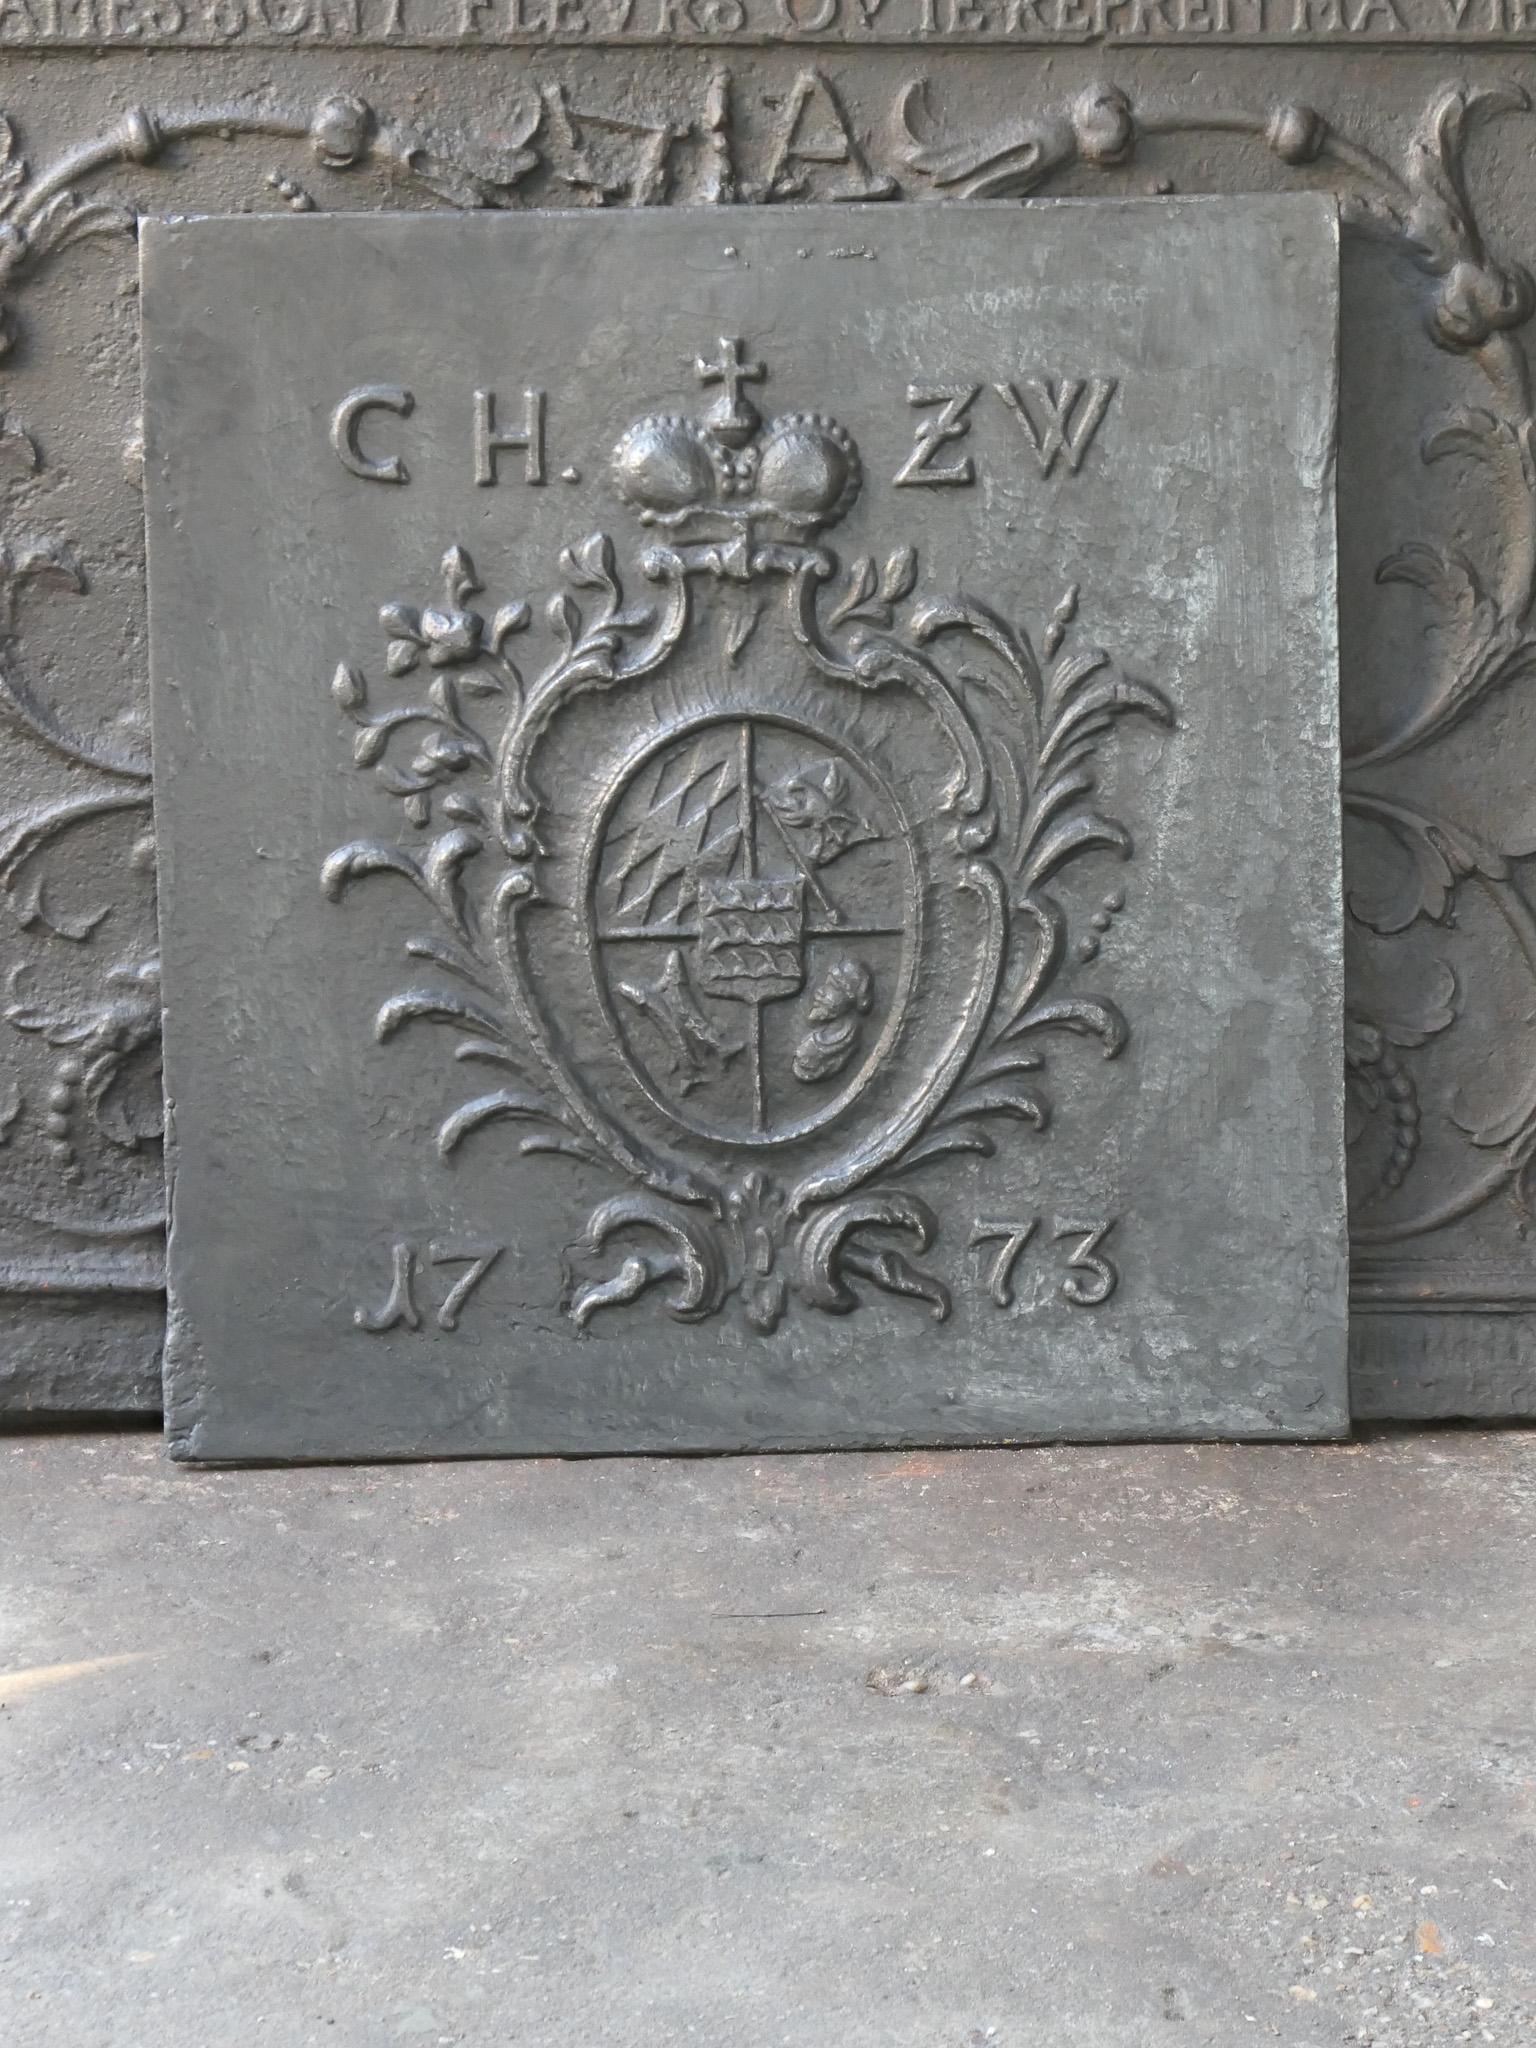 20th century German Louis XIV style fireback with a Coat of Arms.

The fireback is made of cast iron and has a black / pewter patina. It is in a good condition, no cracks.